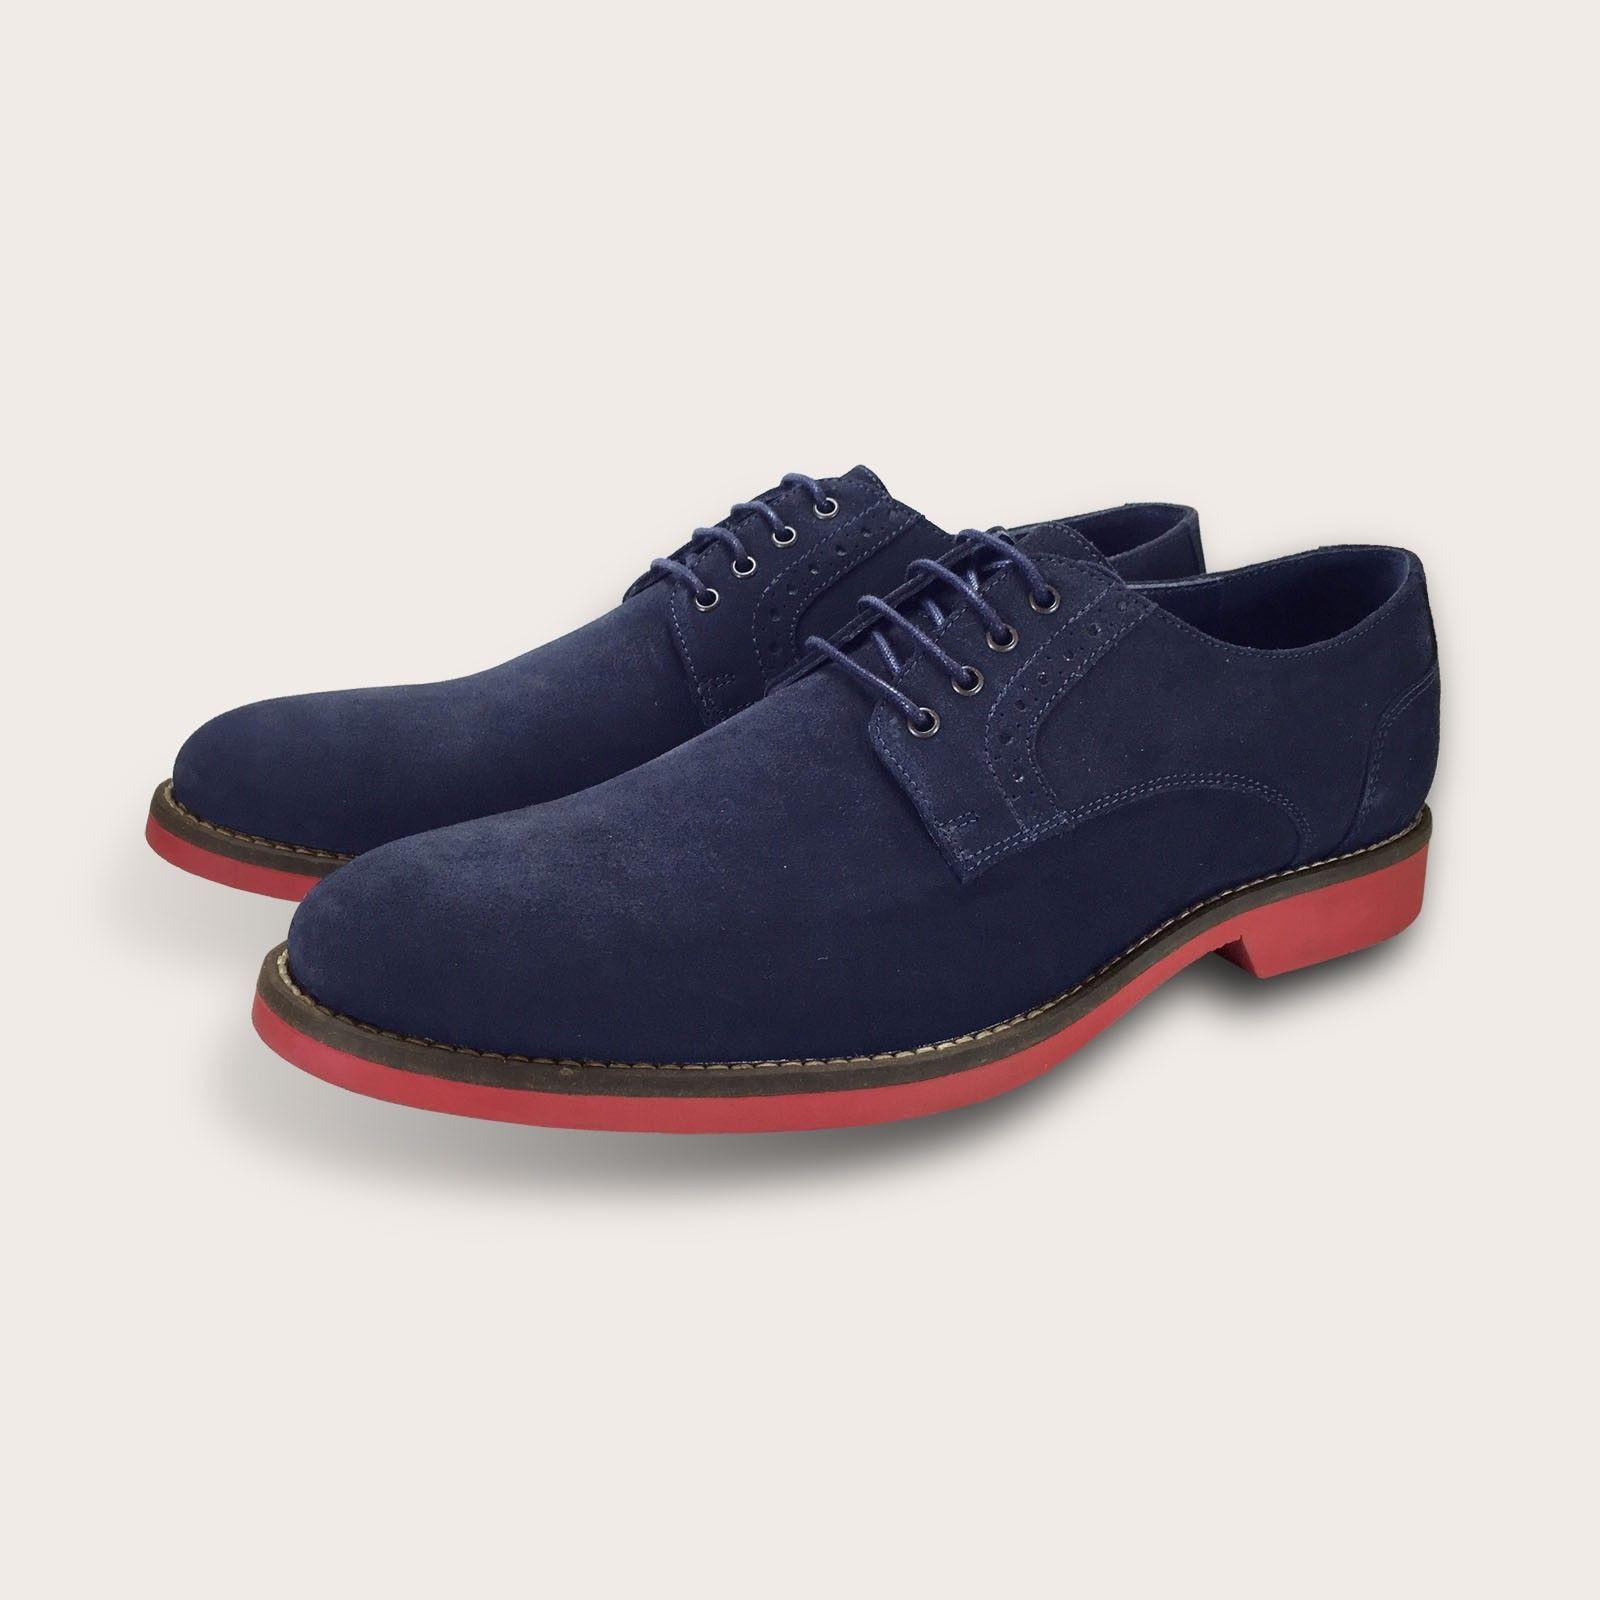 Red and Blue Shoes Logo - Men's Blue Suede Shoes with Red Soles | Buy Shoes Online | Coogan London